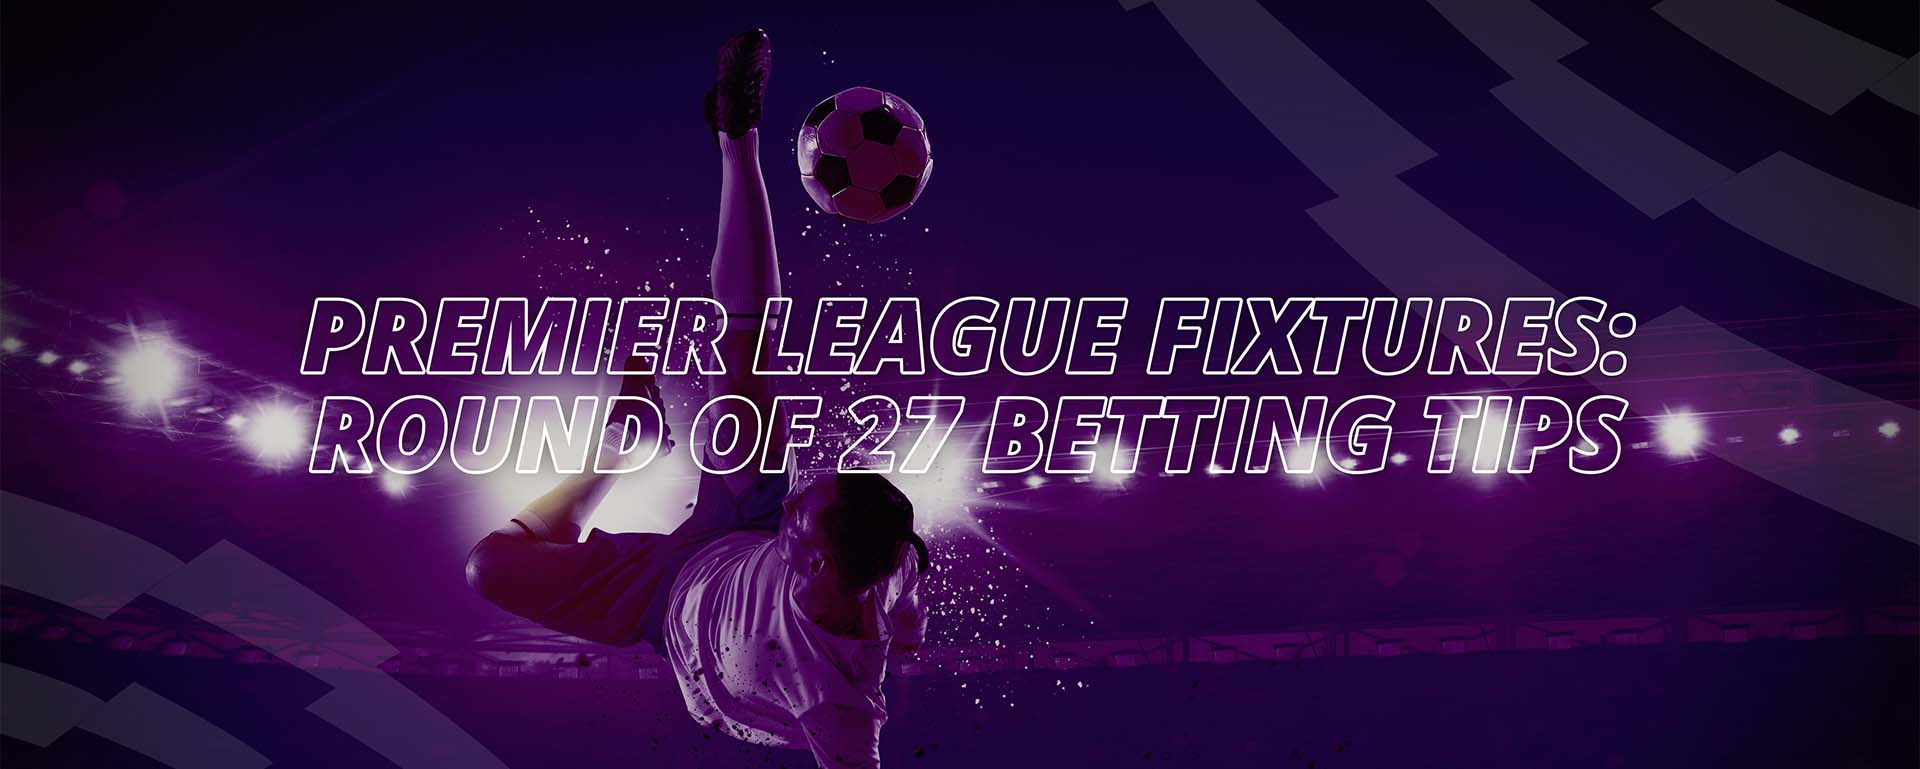 PREMIER LEAGUE – ROUND 27 BETTING TIPS